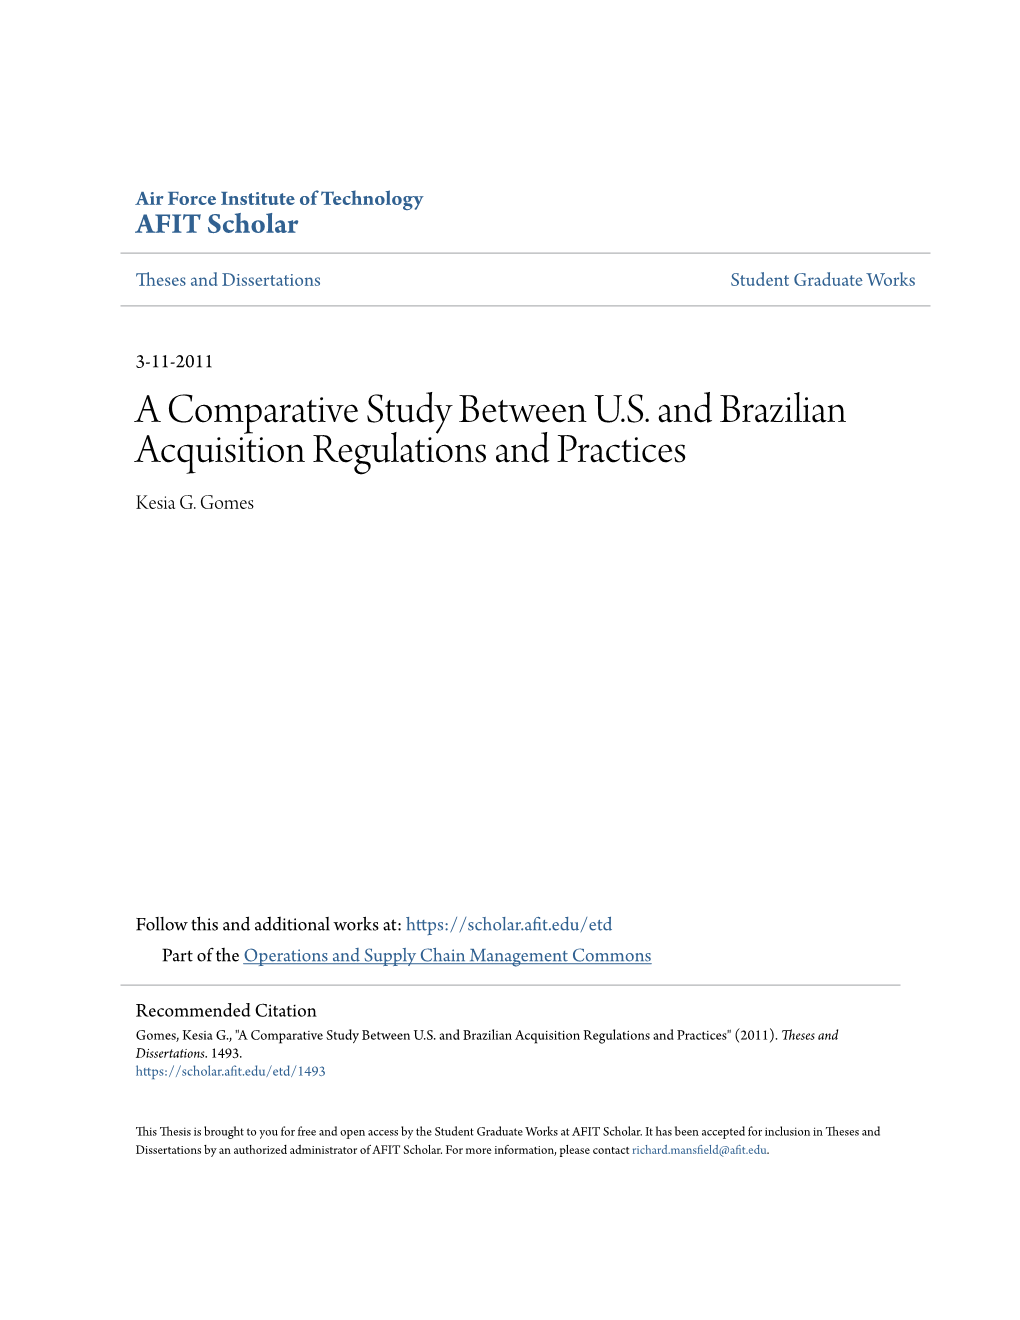 A Comparative Study Between U.S. and Brazilian Acquisition Regulations and Practices Kesia G